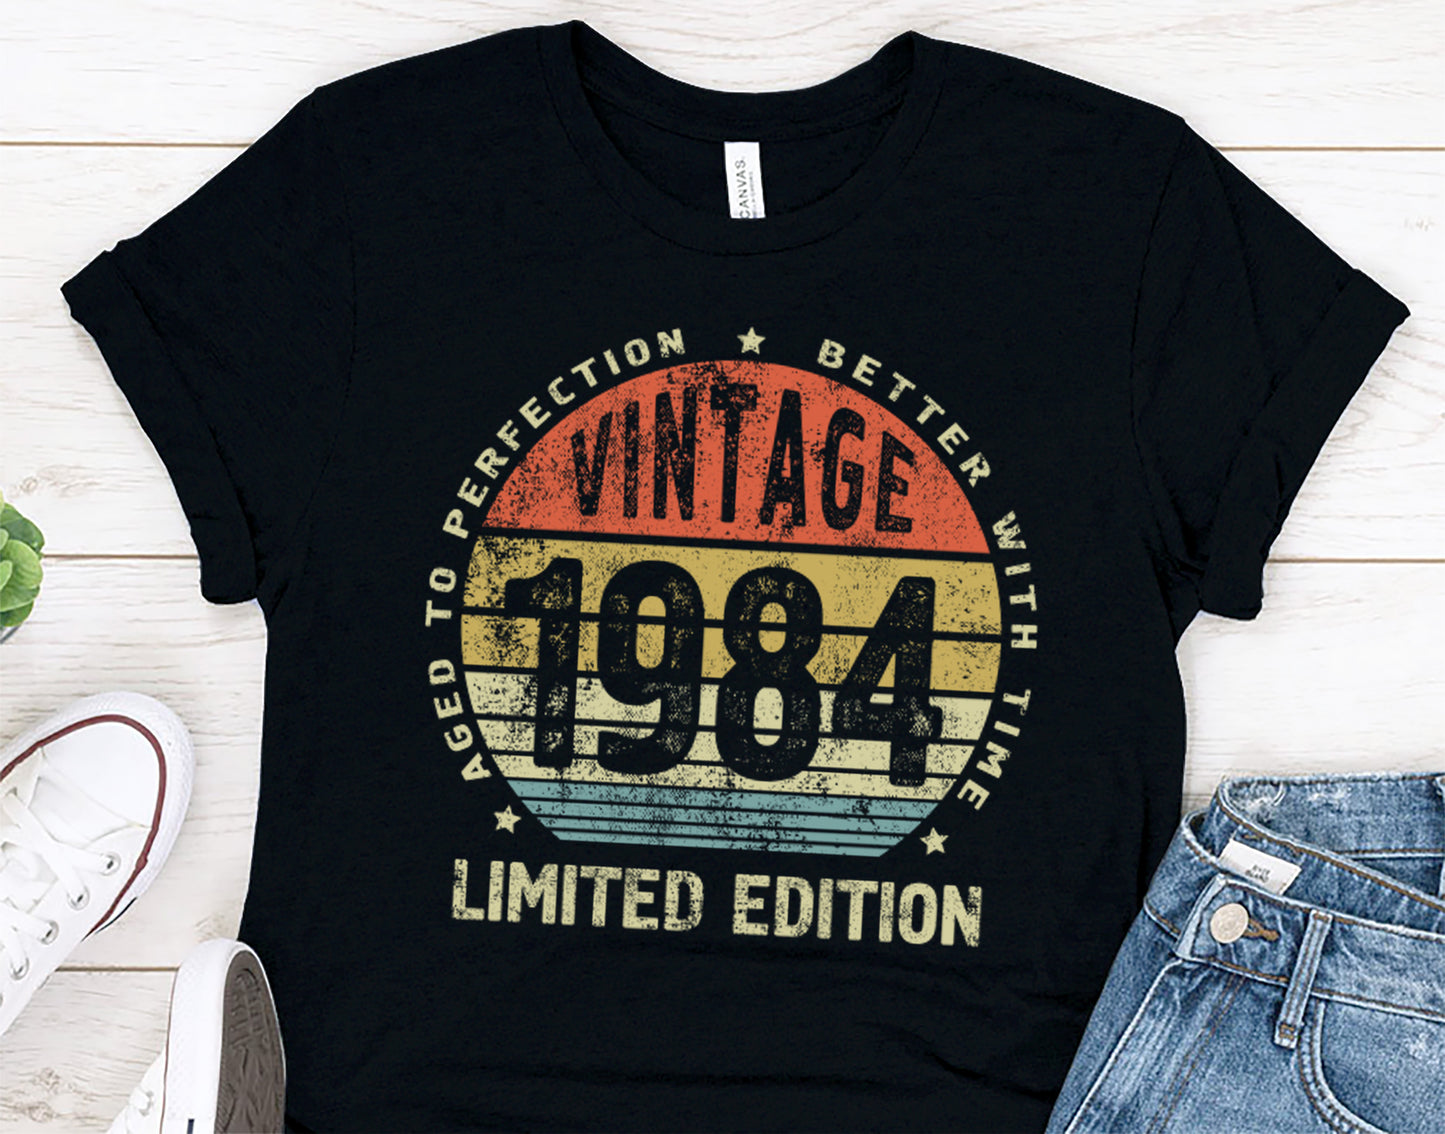 40th birthday gifts, Vintage 1984 Shirt, Aged to Perfection Better with Time